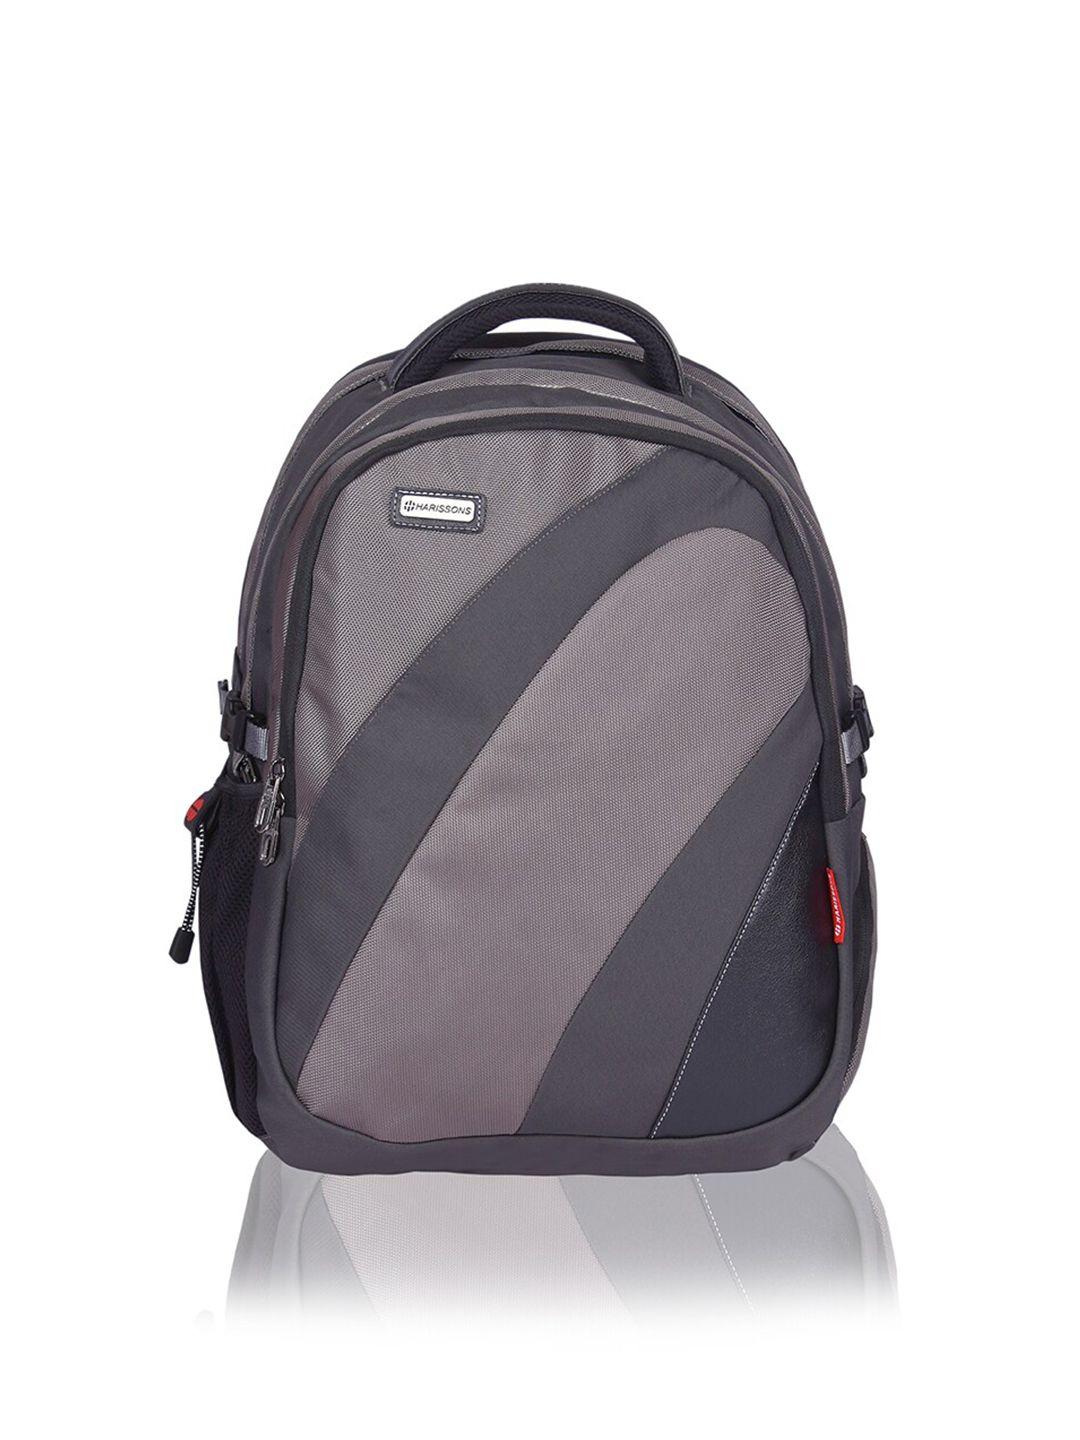 harissons grey 15 inch laptop backpack